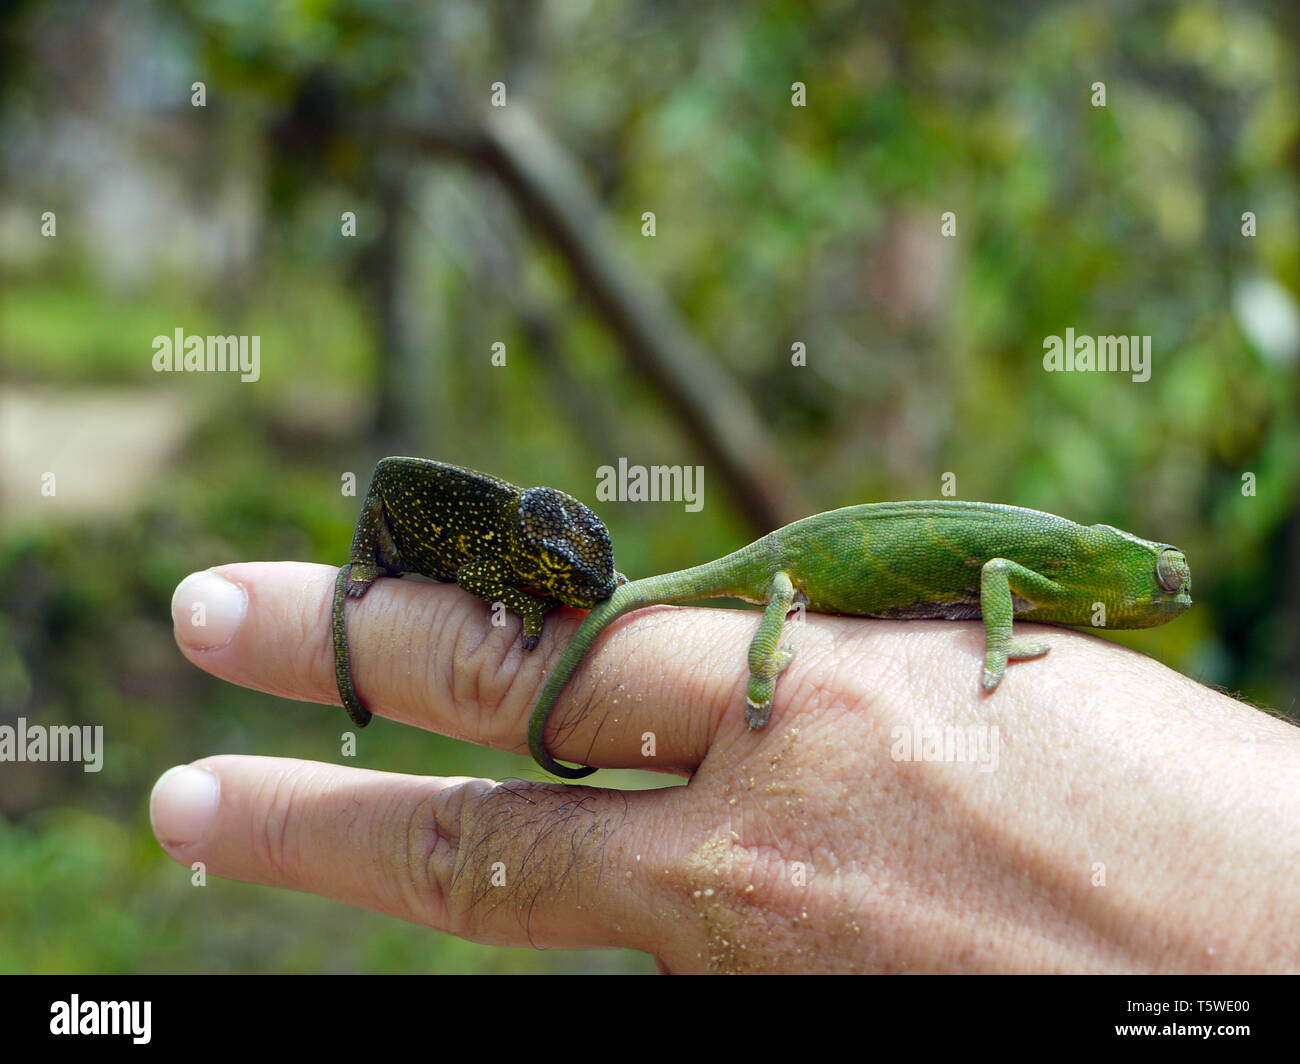 Two small chameleons on a hand, taken in Madagascar. Stock Photo